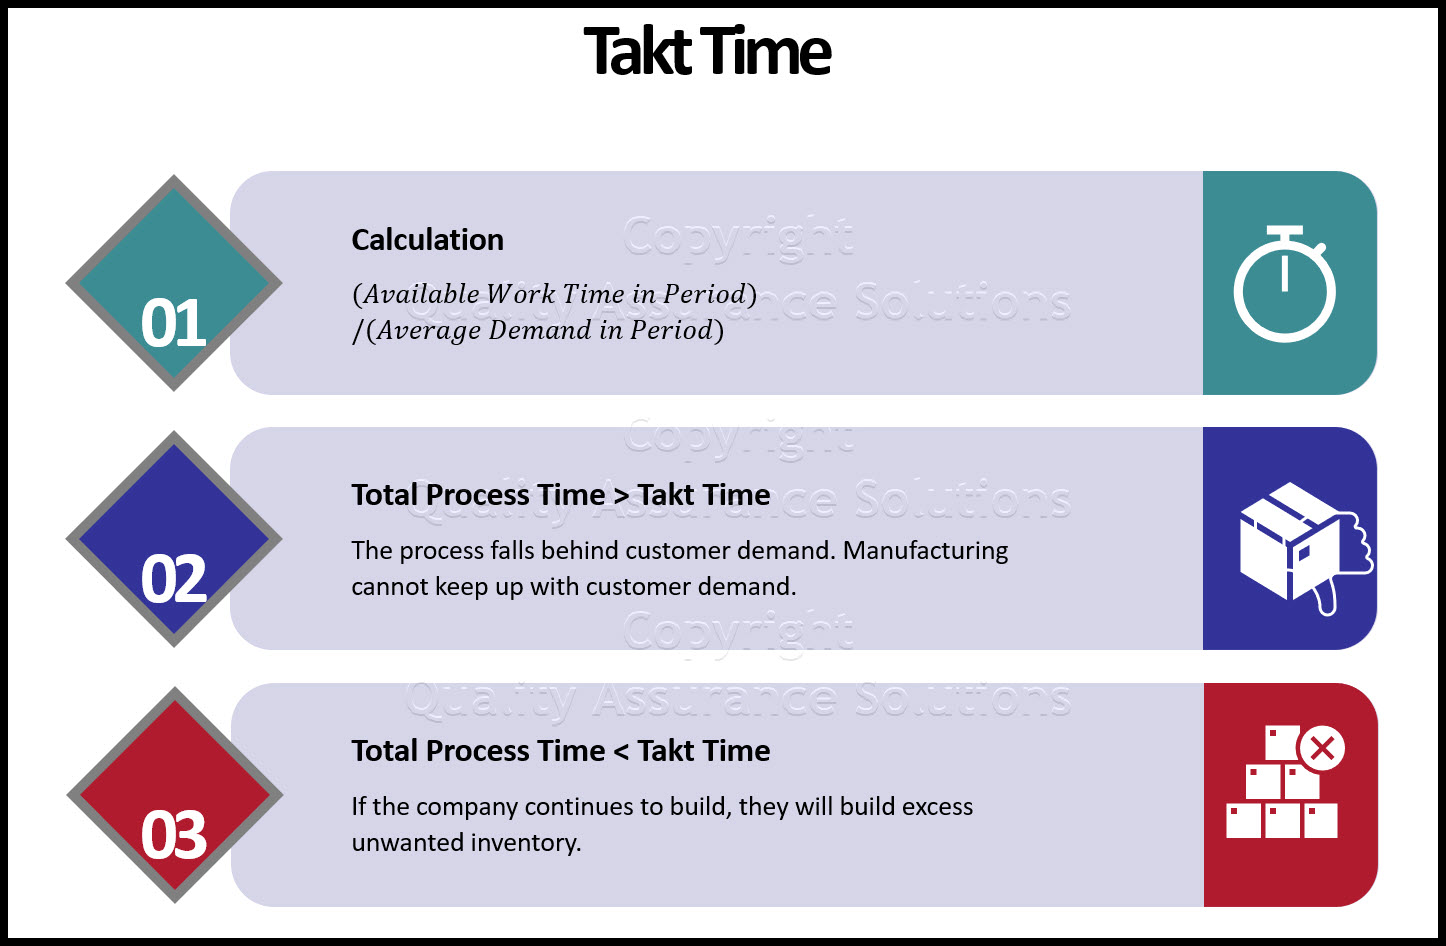 Takt Time is defined as :The rate at which the end product or service must be produced